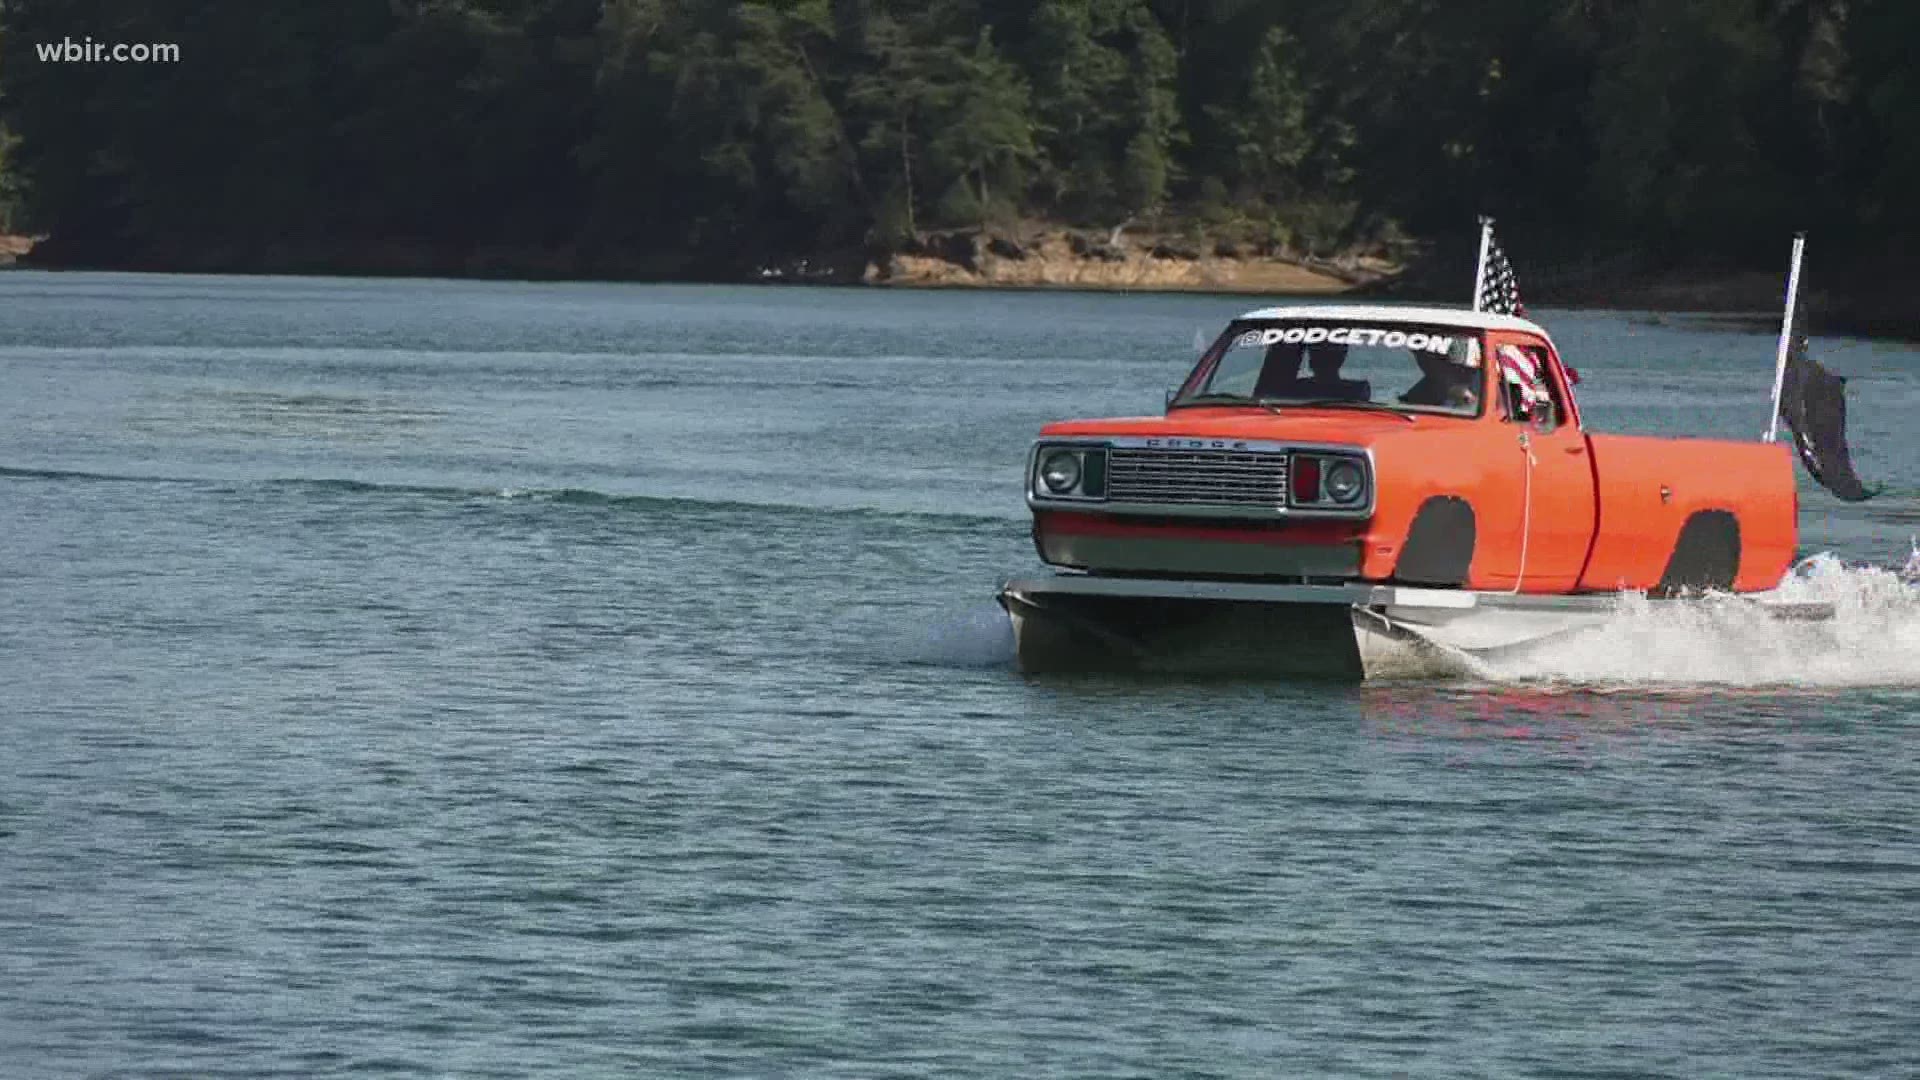 The 'Dodgetoon' is part Dodge pick-up truck and part pontoon boat